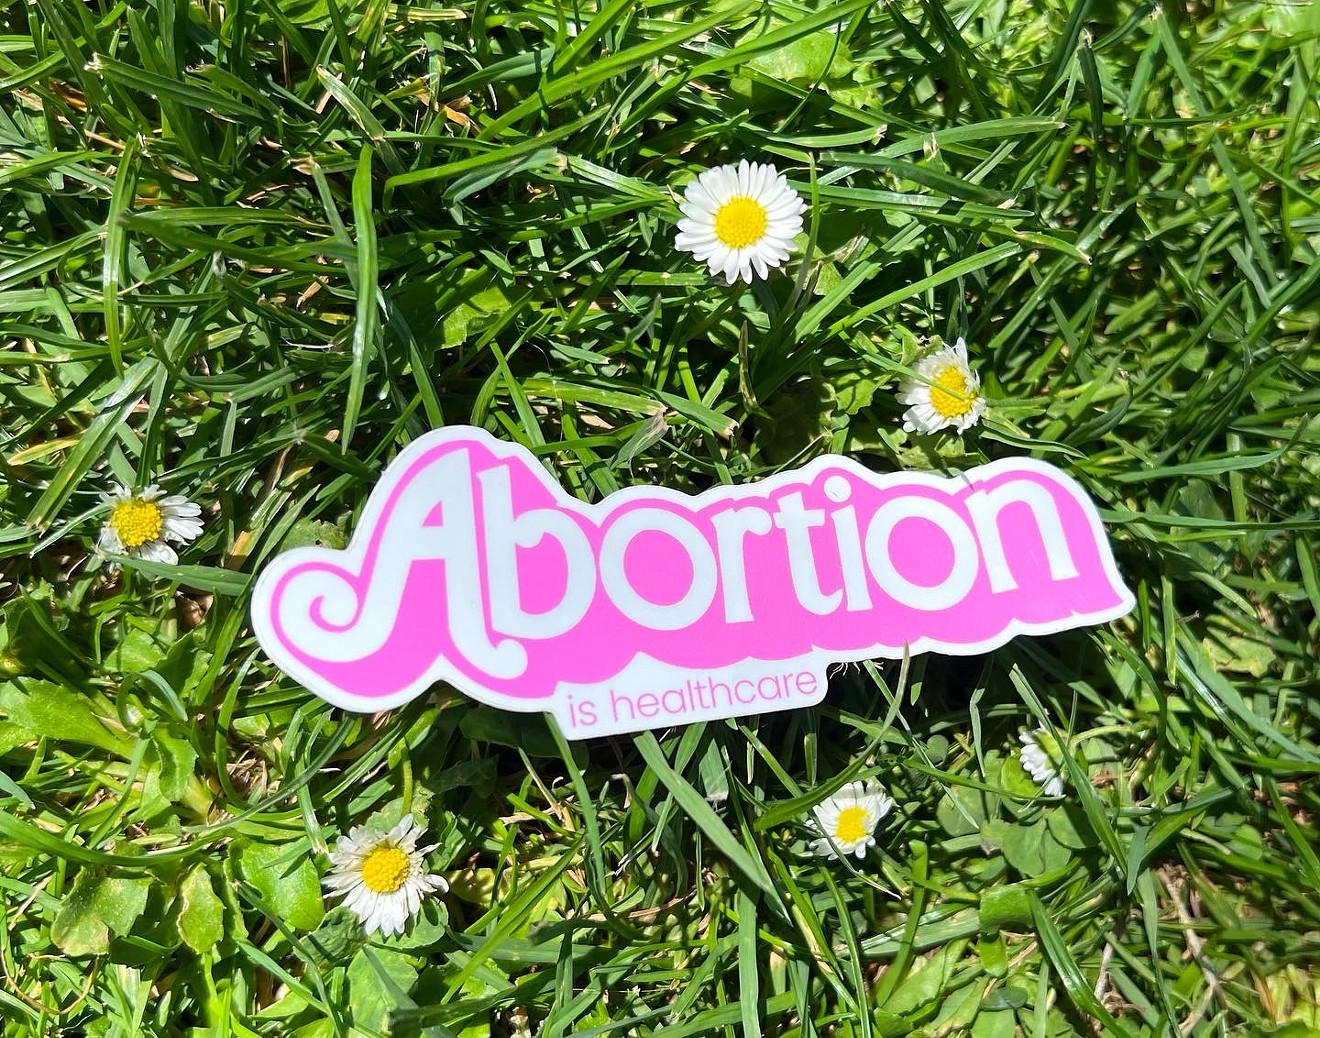 One of the stickers in Carolyn Patten's new line, which benefits women's reproductive rights.